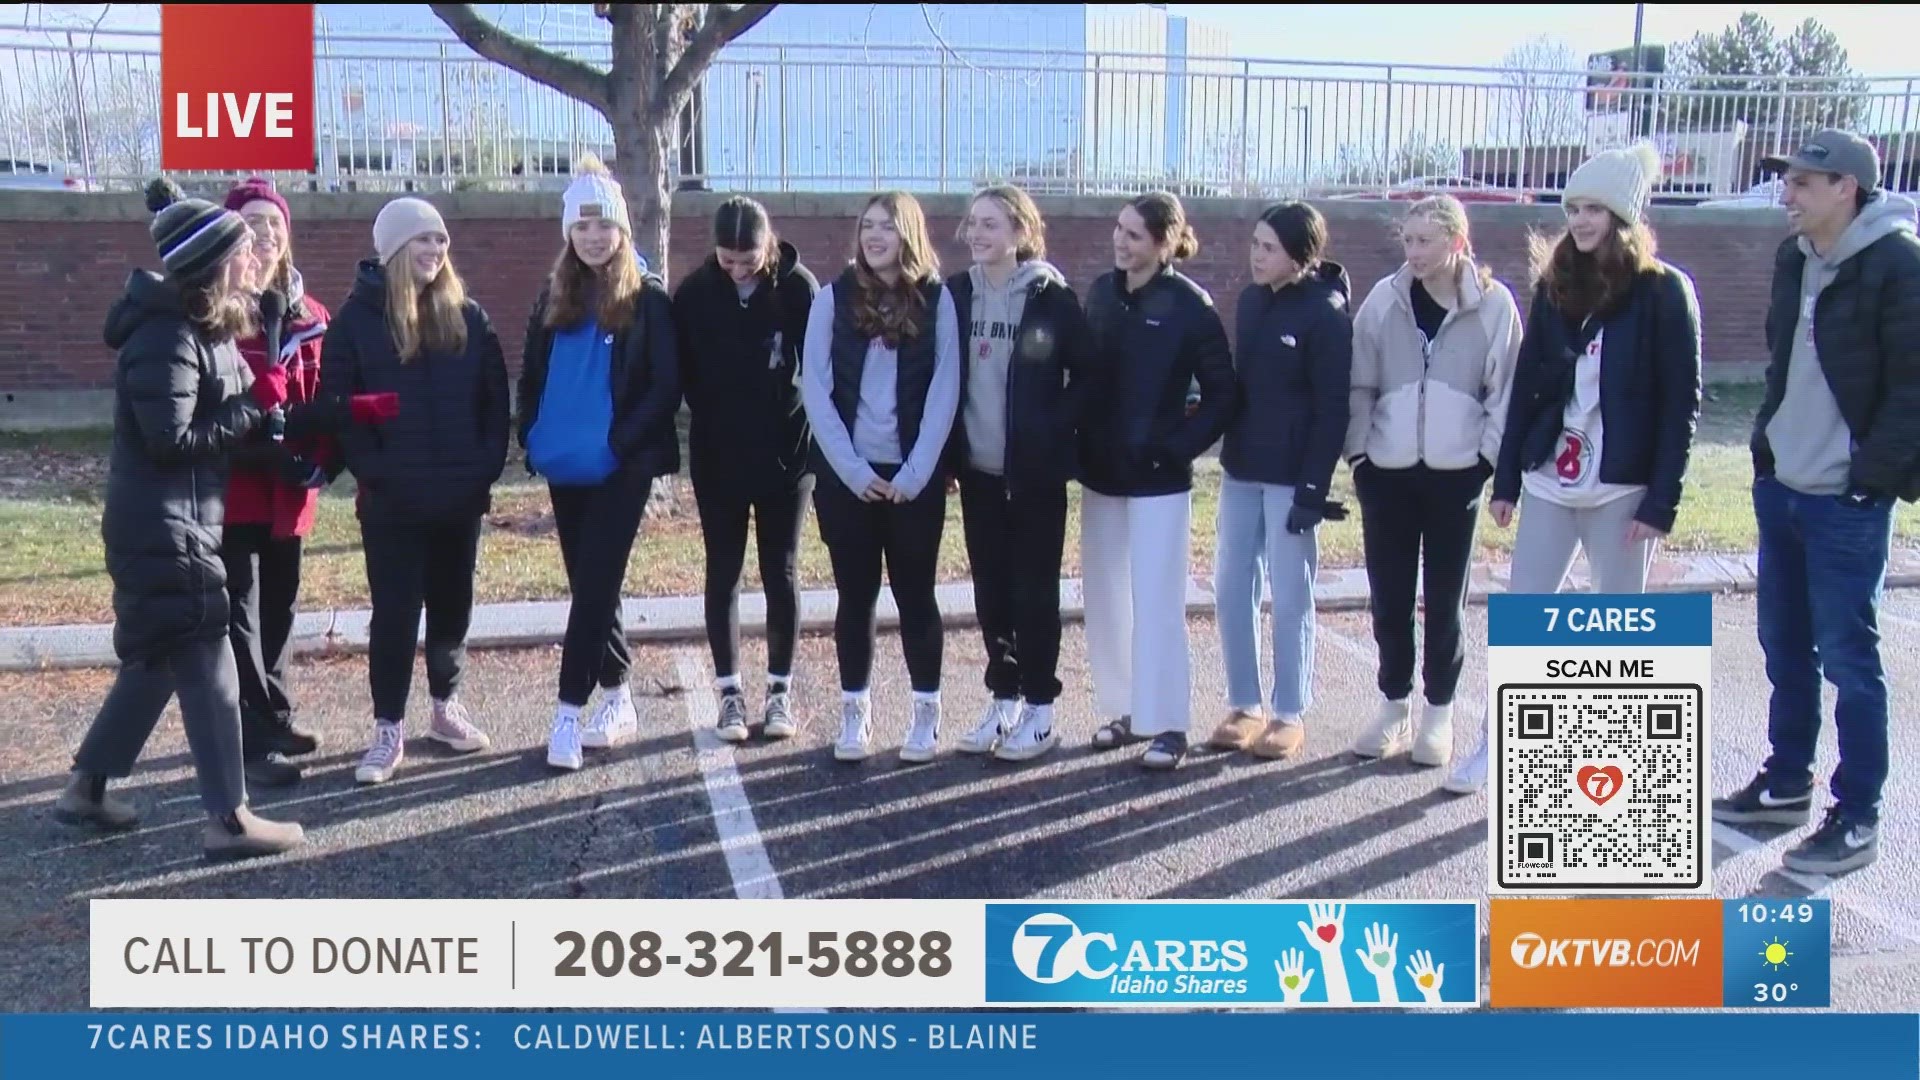 The Boise High School junior varsity girls basketball team helped KTVB highlight Idaho charities and collect donations Saturday at Albertsons Stadium for 7Cares.